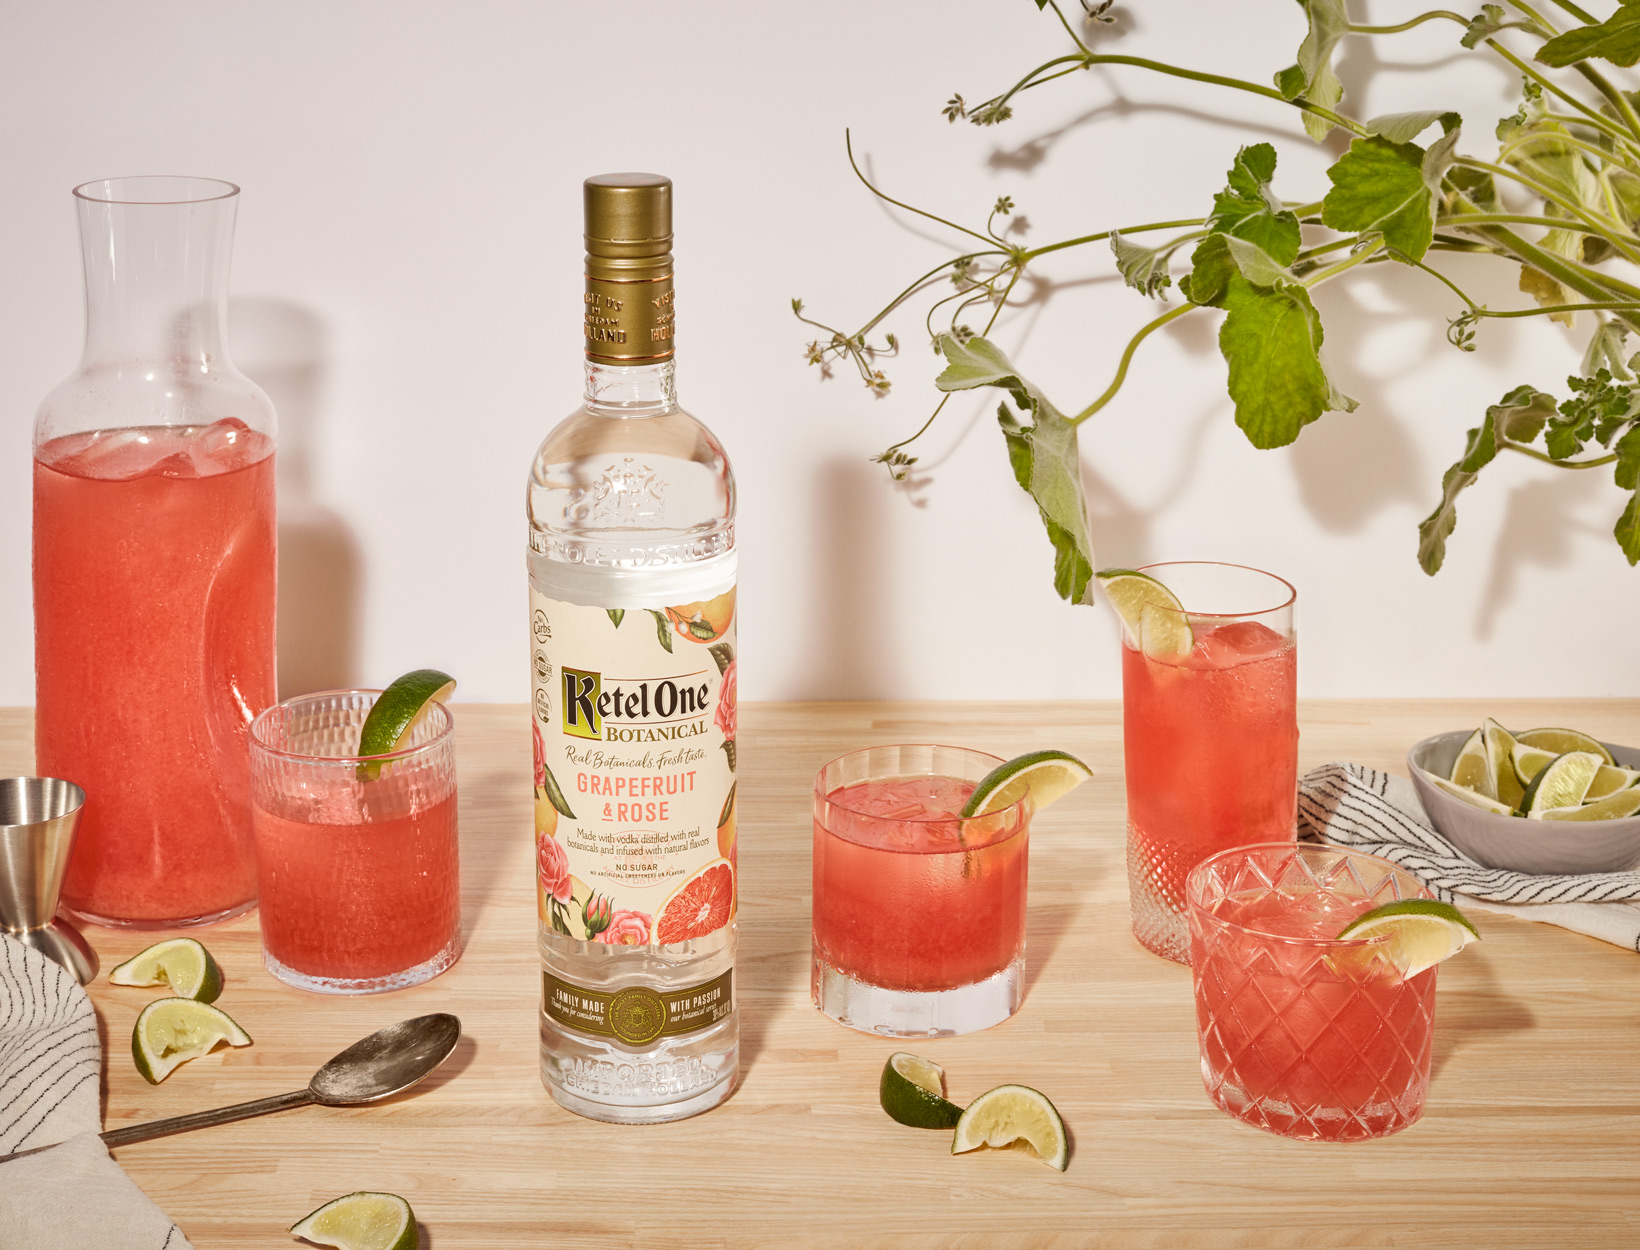 is ketel one grapefruit and rose gluten free